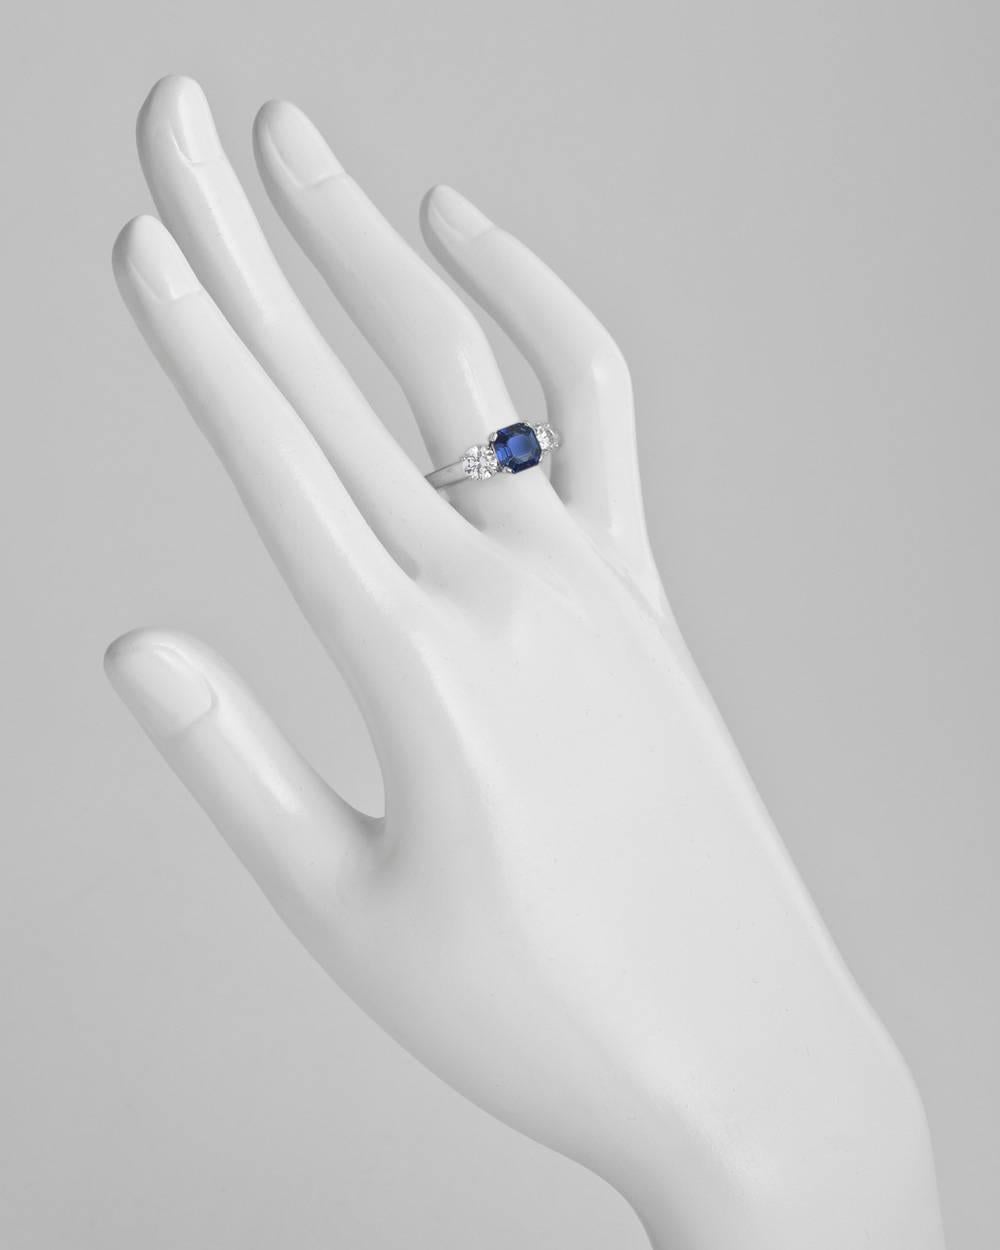 Sapphire and diamond three-stone ring, centering an emerald-cut sapphire weighing approximately 1.92 carats, with a pair of near-colorless round-cut diamond shoulders weighing approximately 0.87 total carats (G-H color, SI1-SI2 clarity), mounted in